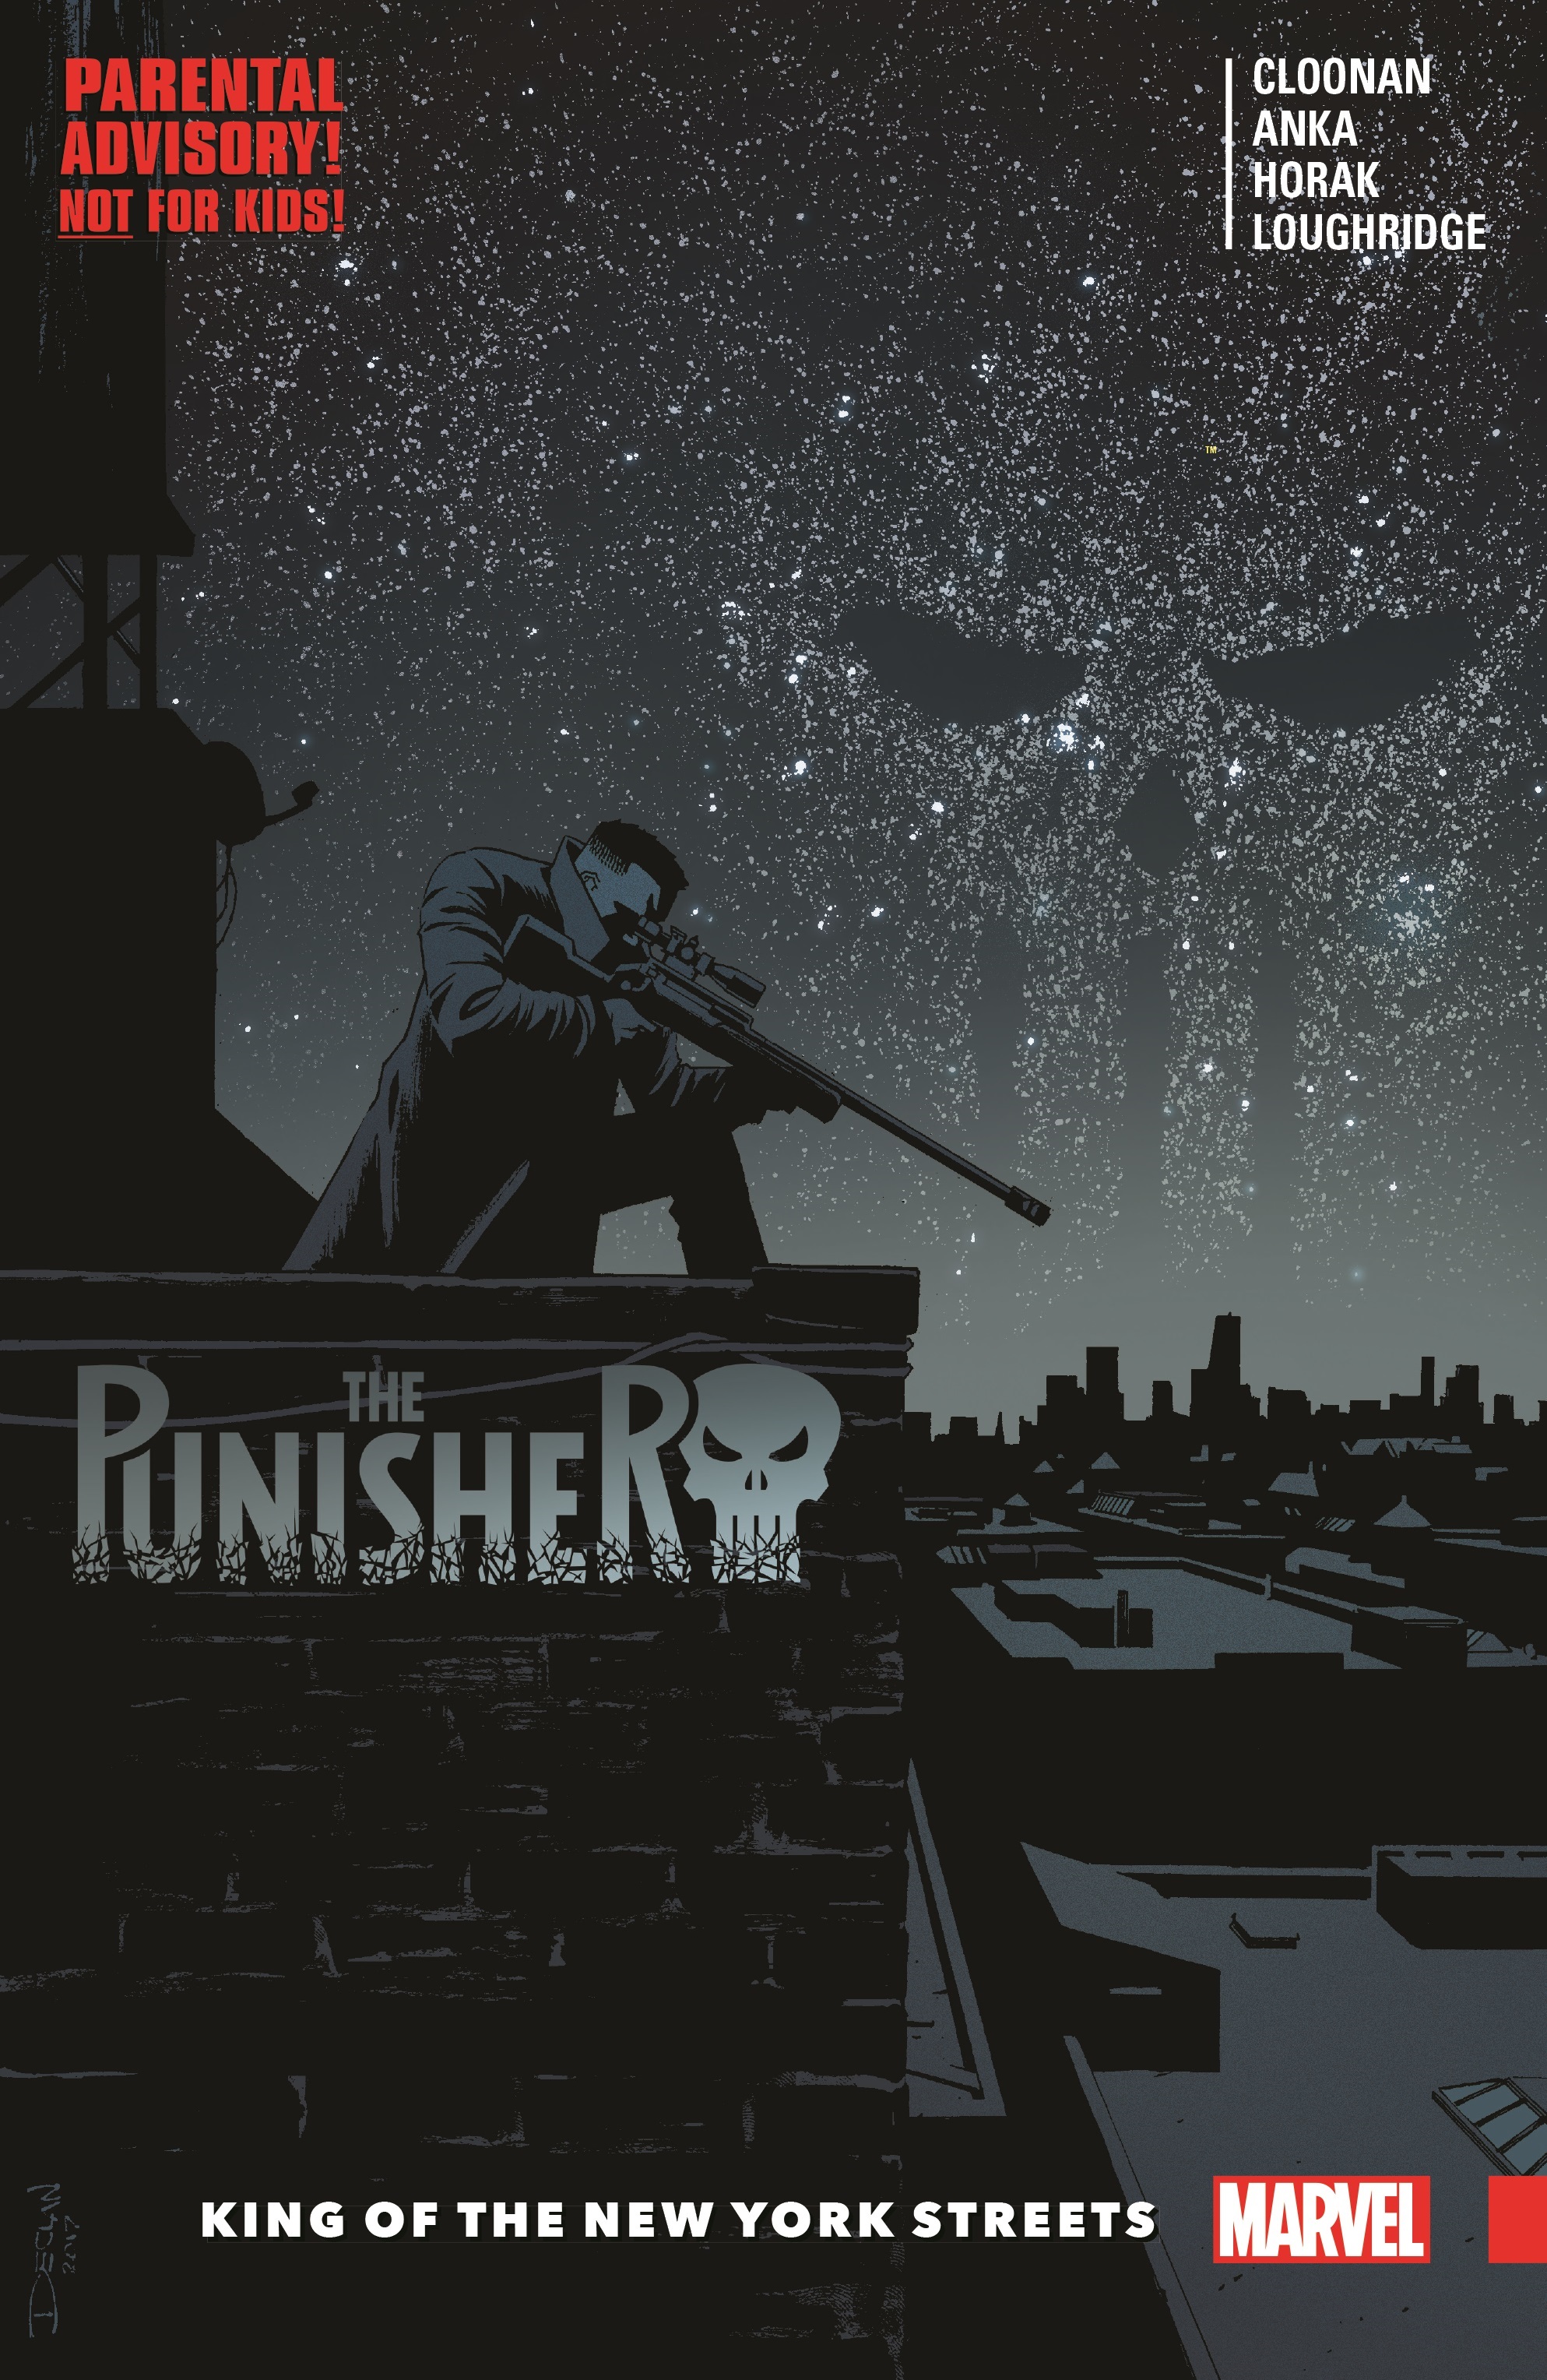 The Punisher Vol. 3: King of the New York Streets (Trade Paperback)